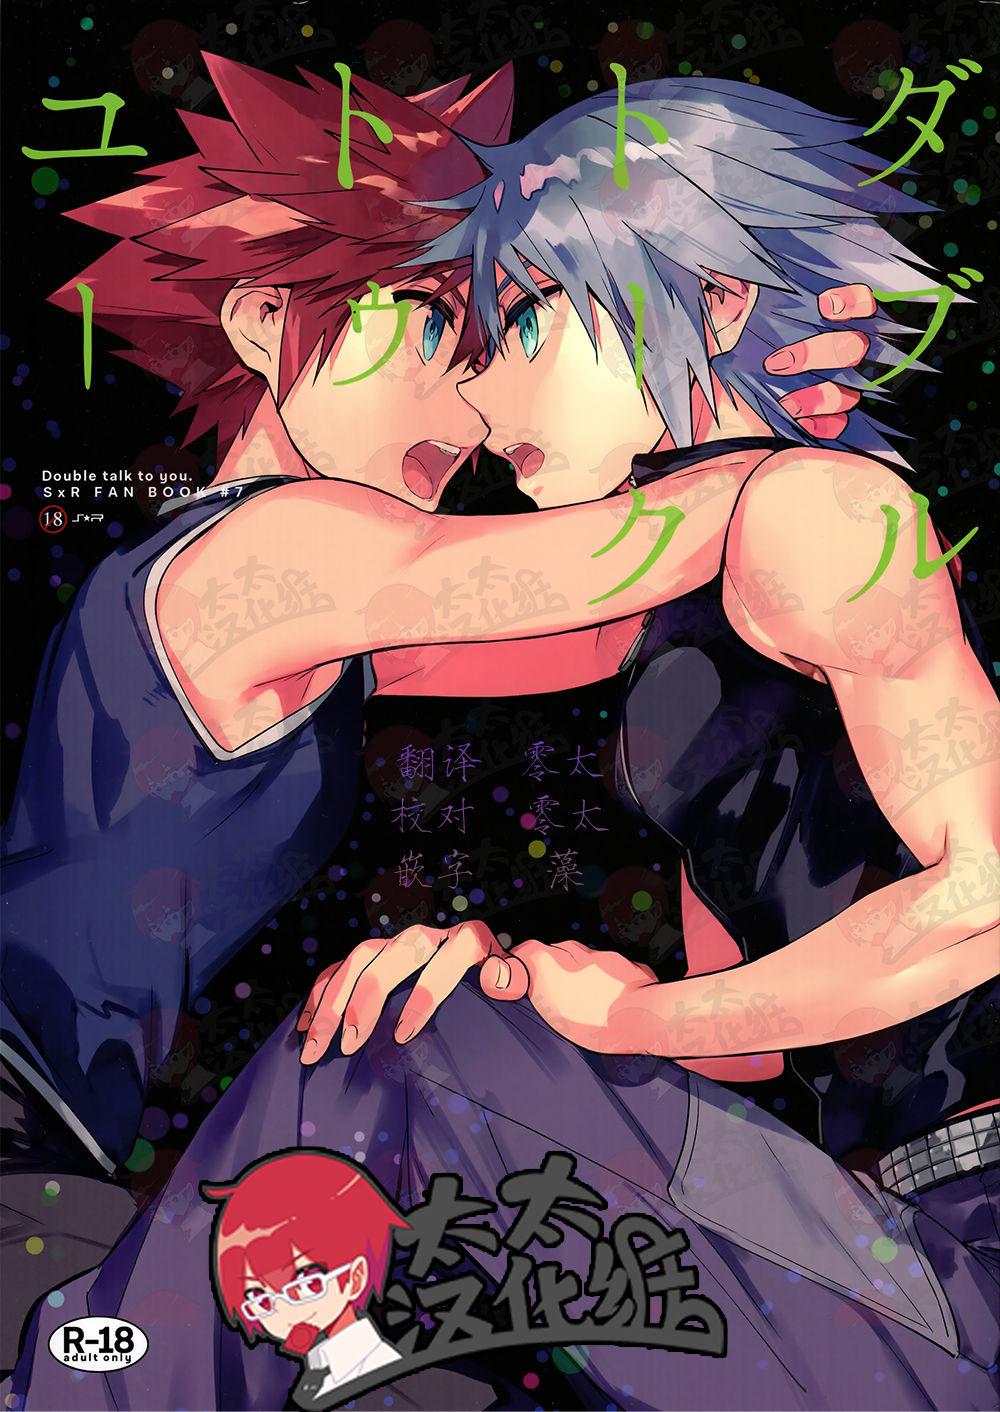 Maledom Double Talk to You. - Kingdom hearts Joven - Picture 1